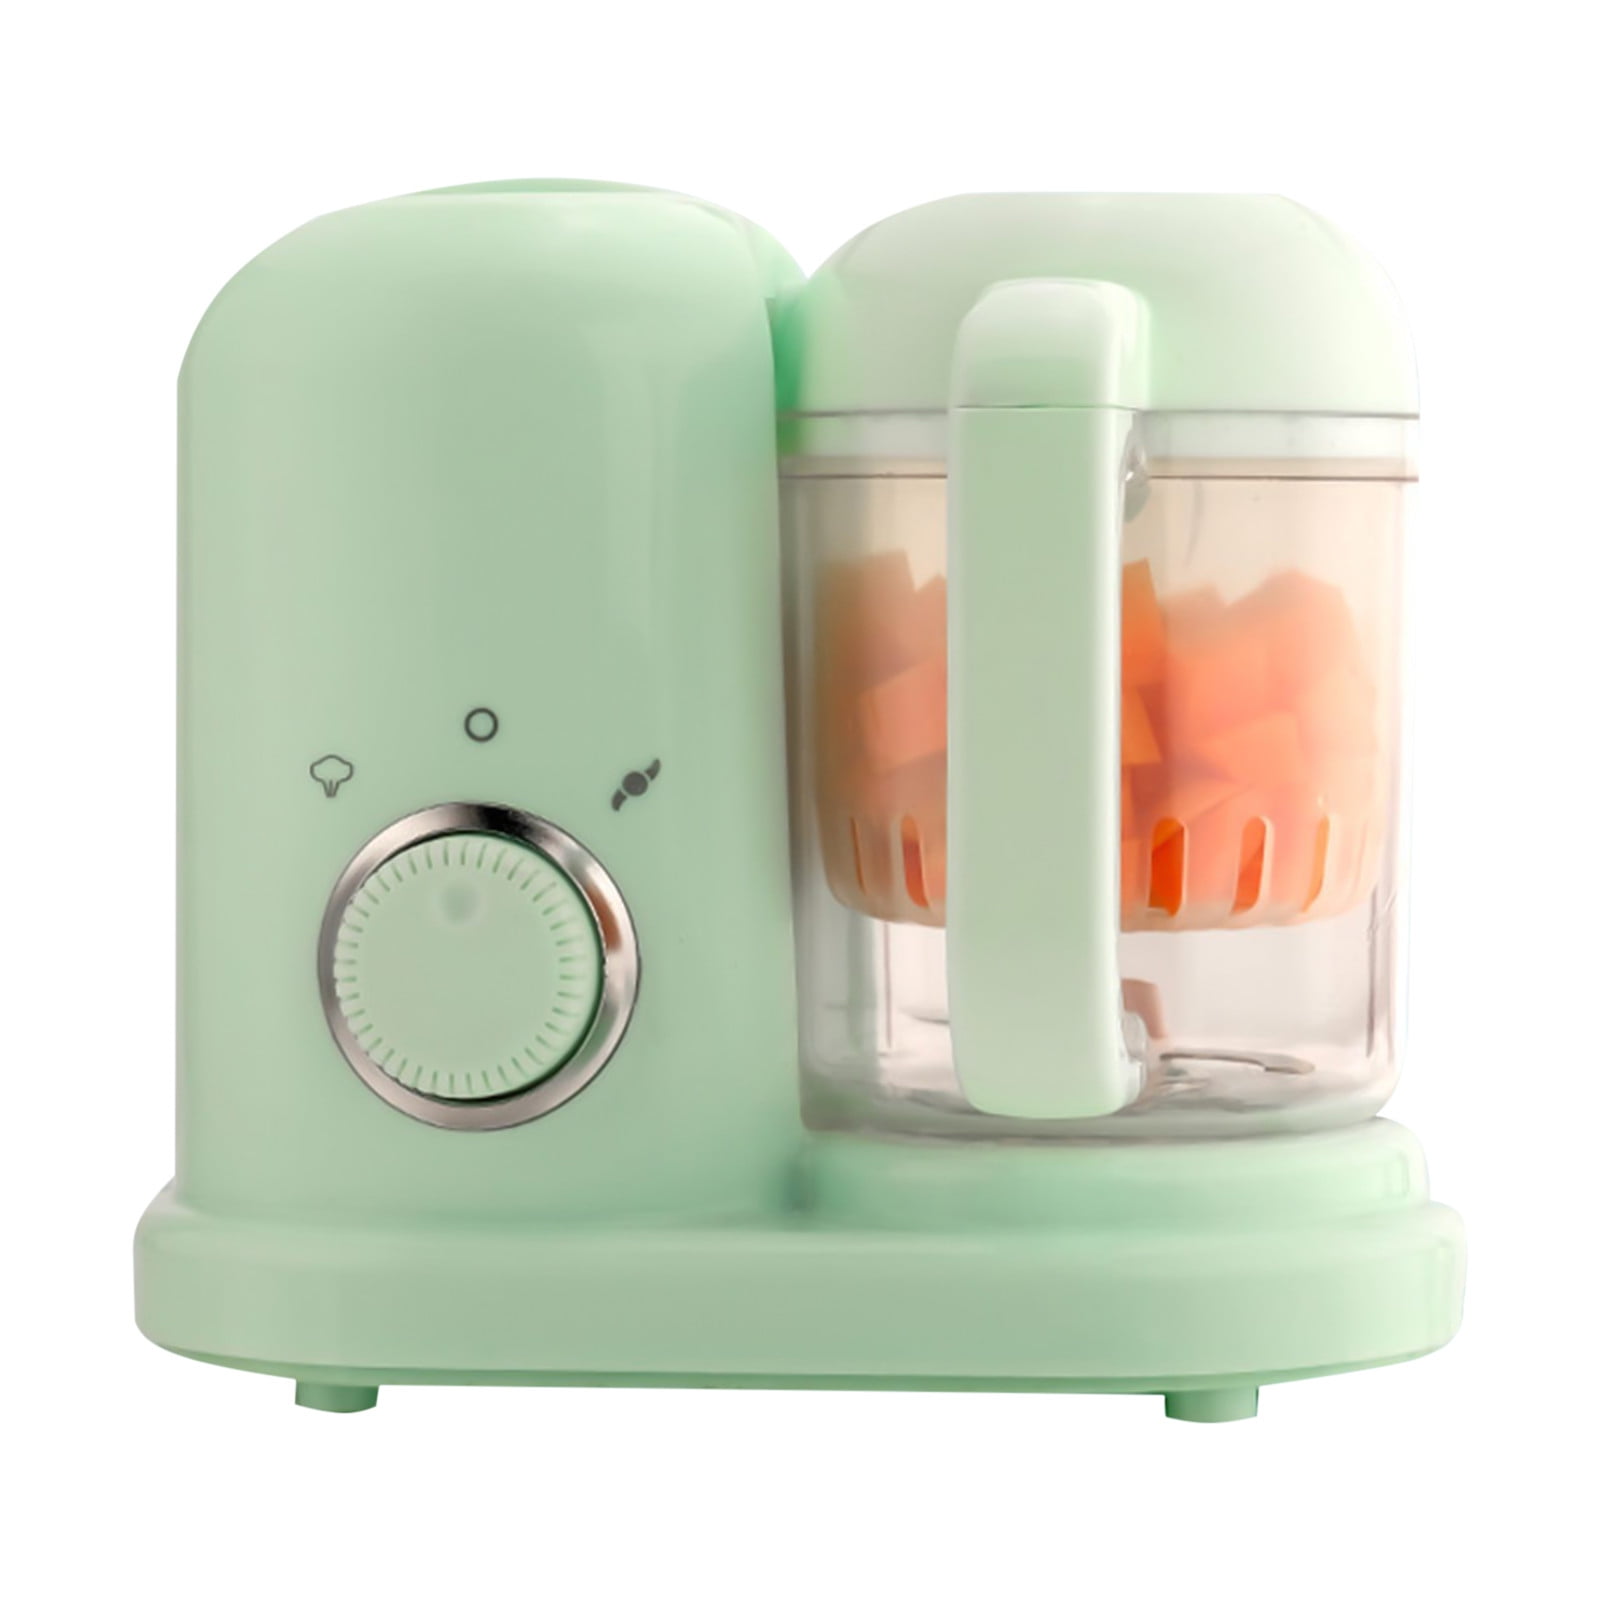 Mliter Babycook 5 in 1 Baby Food Processor, Steam Cooker, With Blending,  Mixing & Chopping, Sterilizing and Warming & Reheating - Bed Bath & Beyond  - 28066657